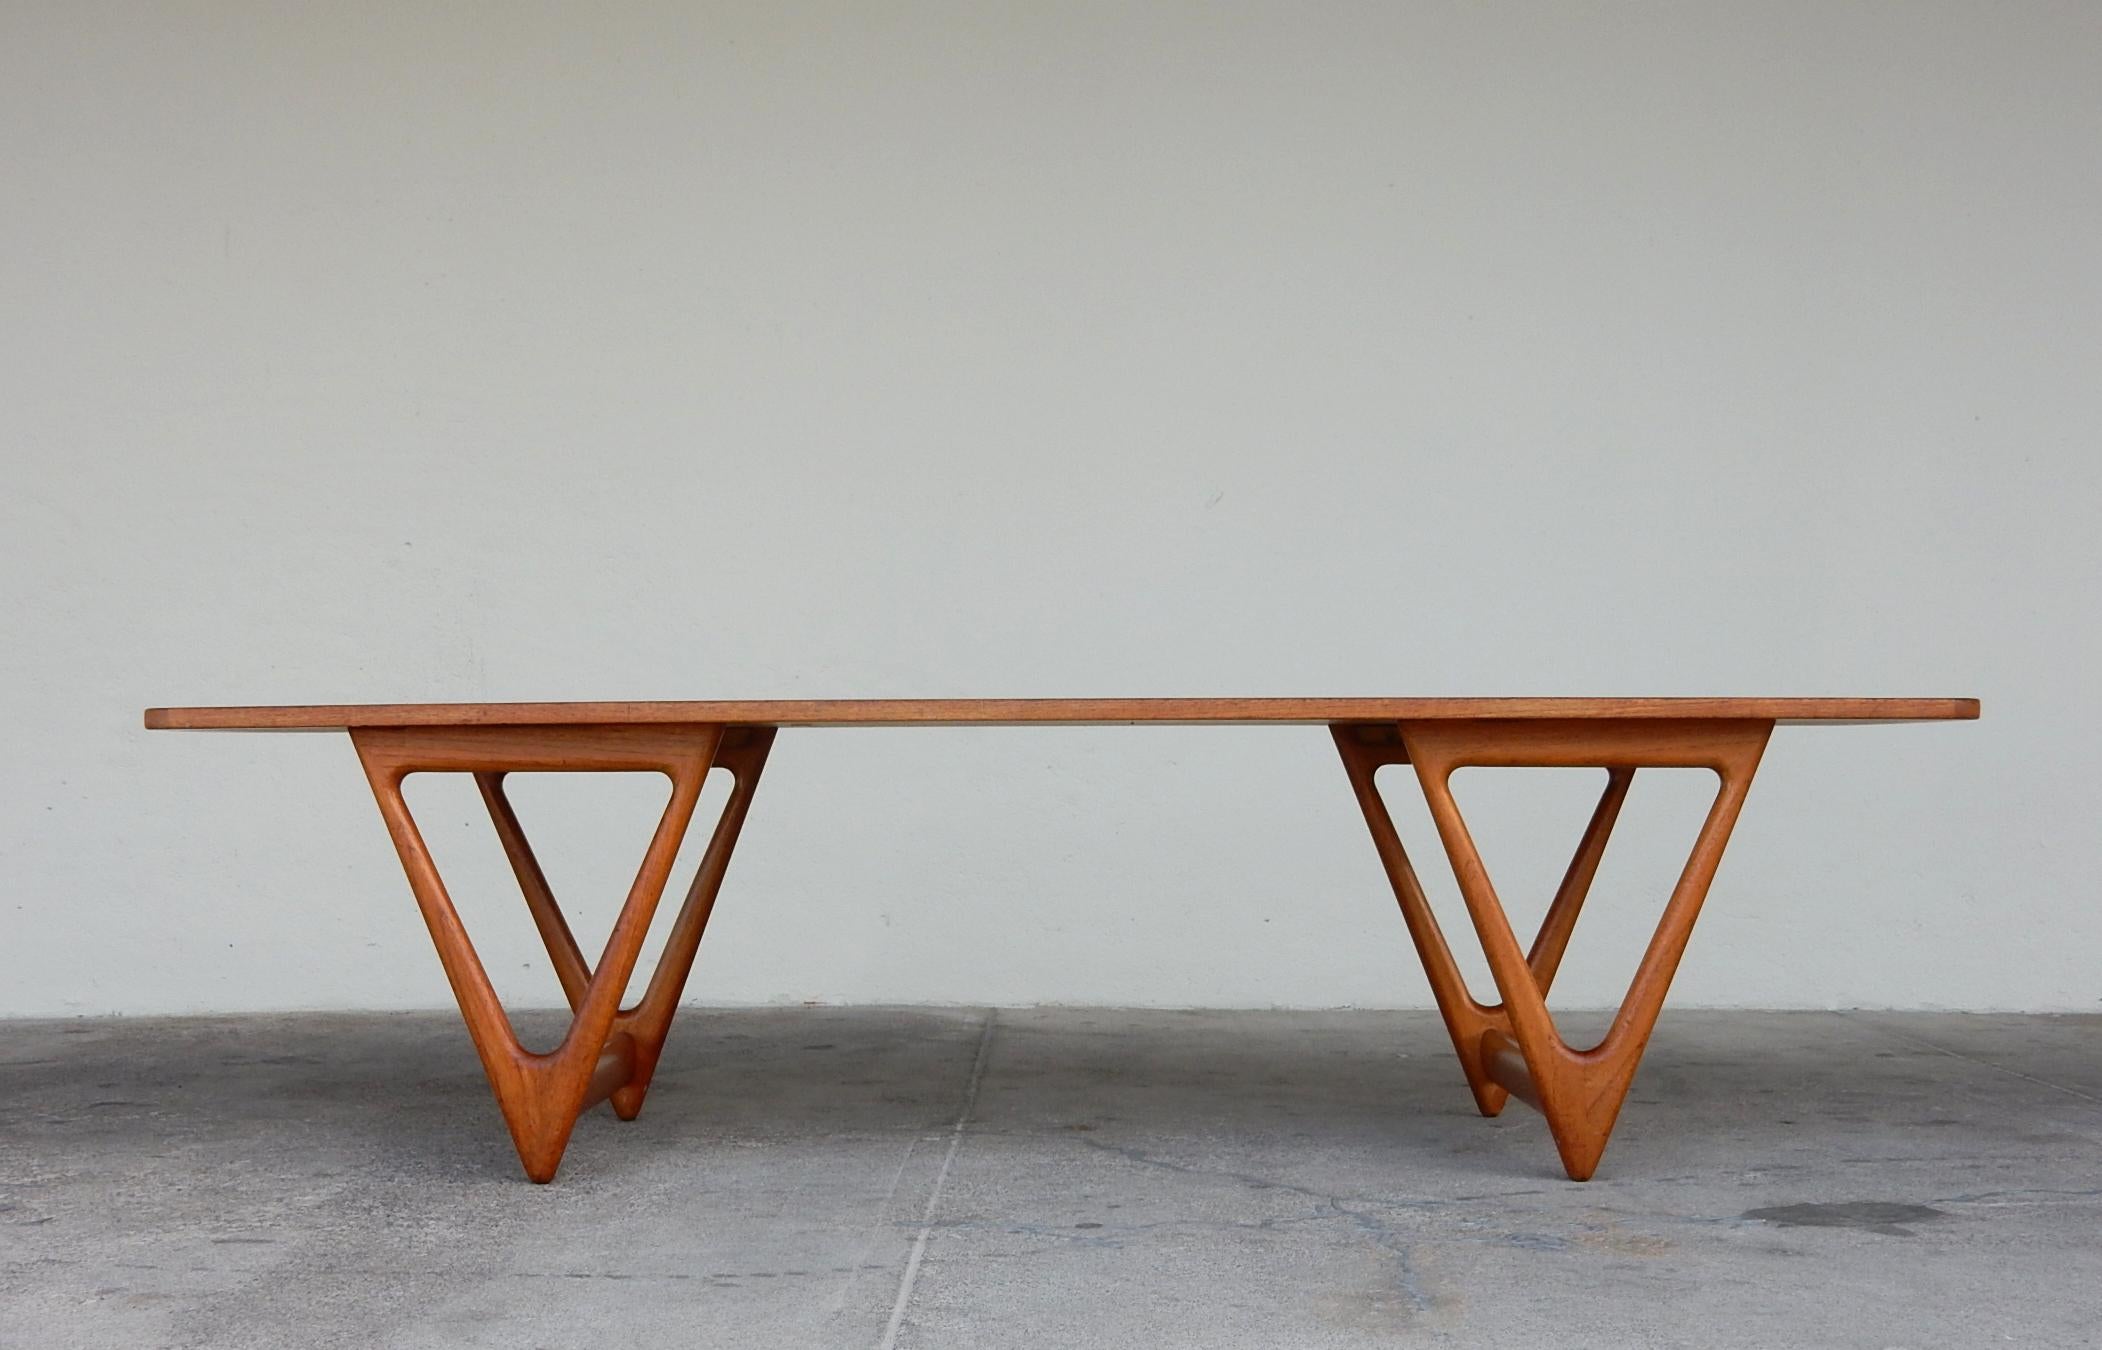 Incredible large coffee table by Danish furniture designer Kurt Østervig (1912-1986).
This very large coffee table is completely original including finish.
It was well cared for with no damage or repairs. Top is clean with barely a scratch.
Solid